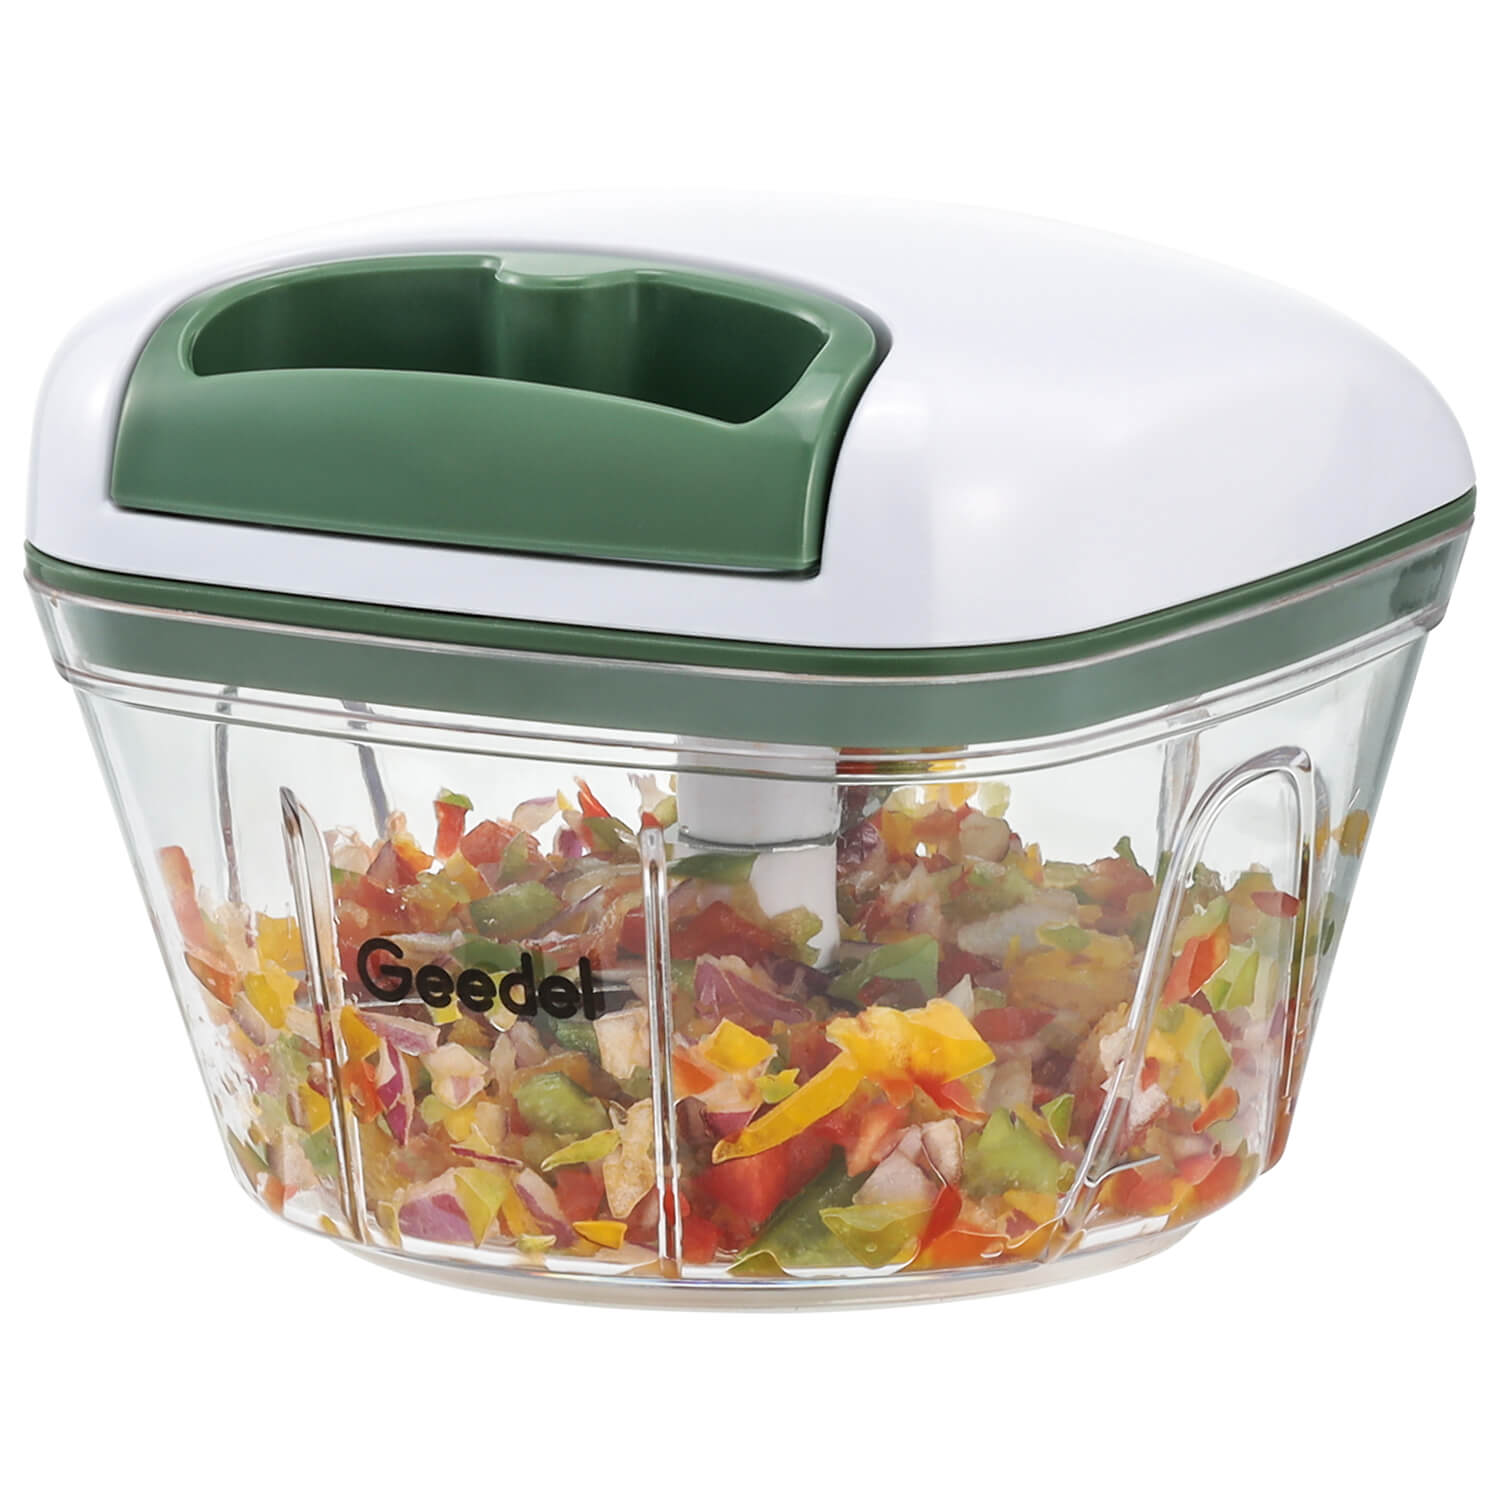 Geedel Pull String Food Chopper,Vegetable Chopper, 2.5 Cup Onion Dicer White